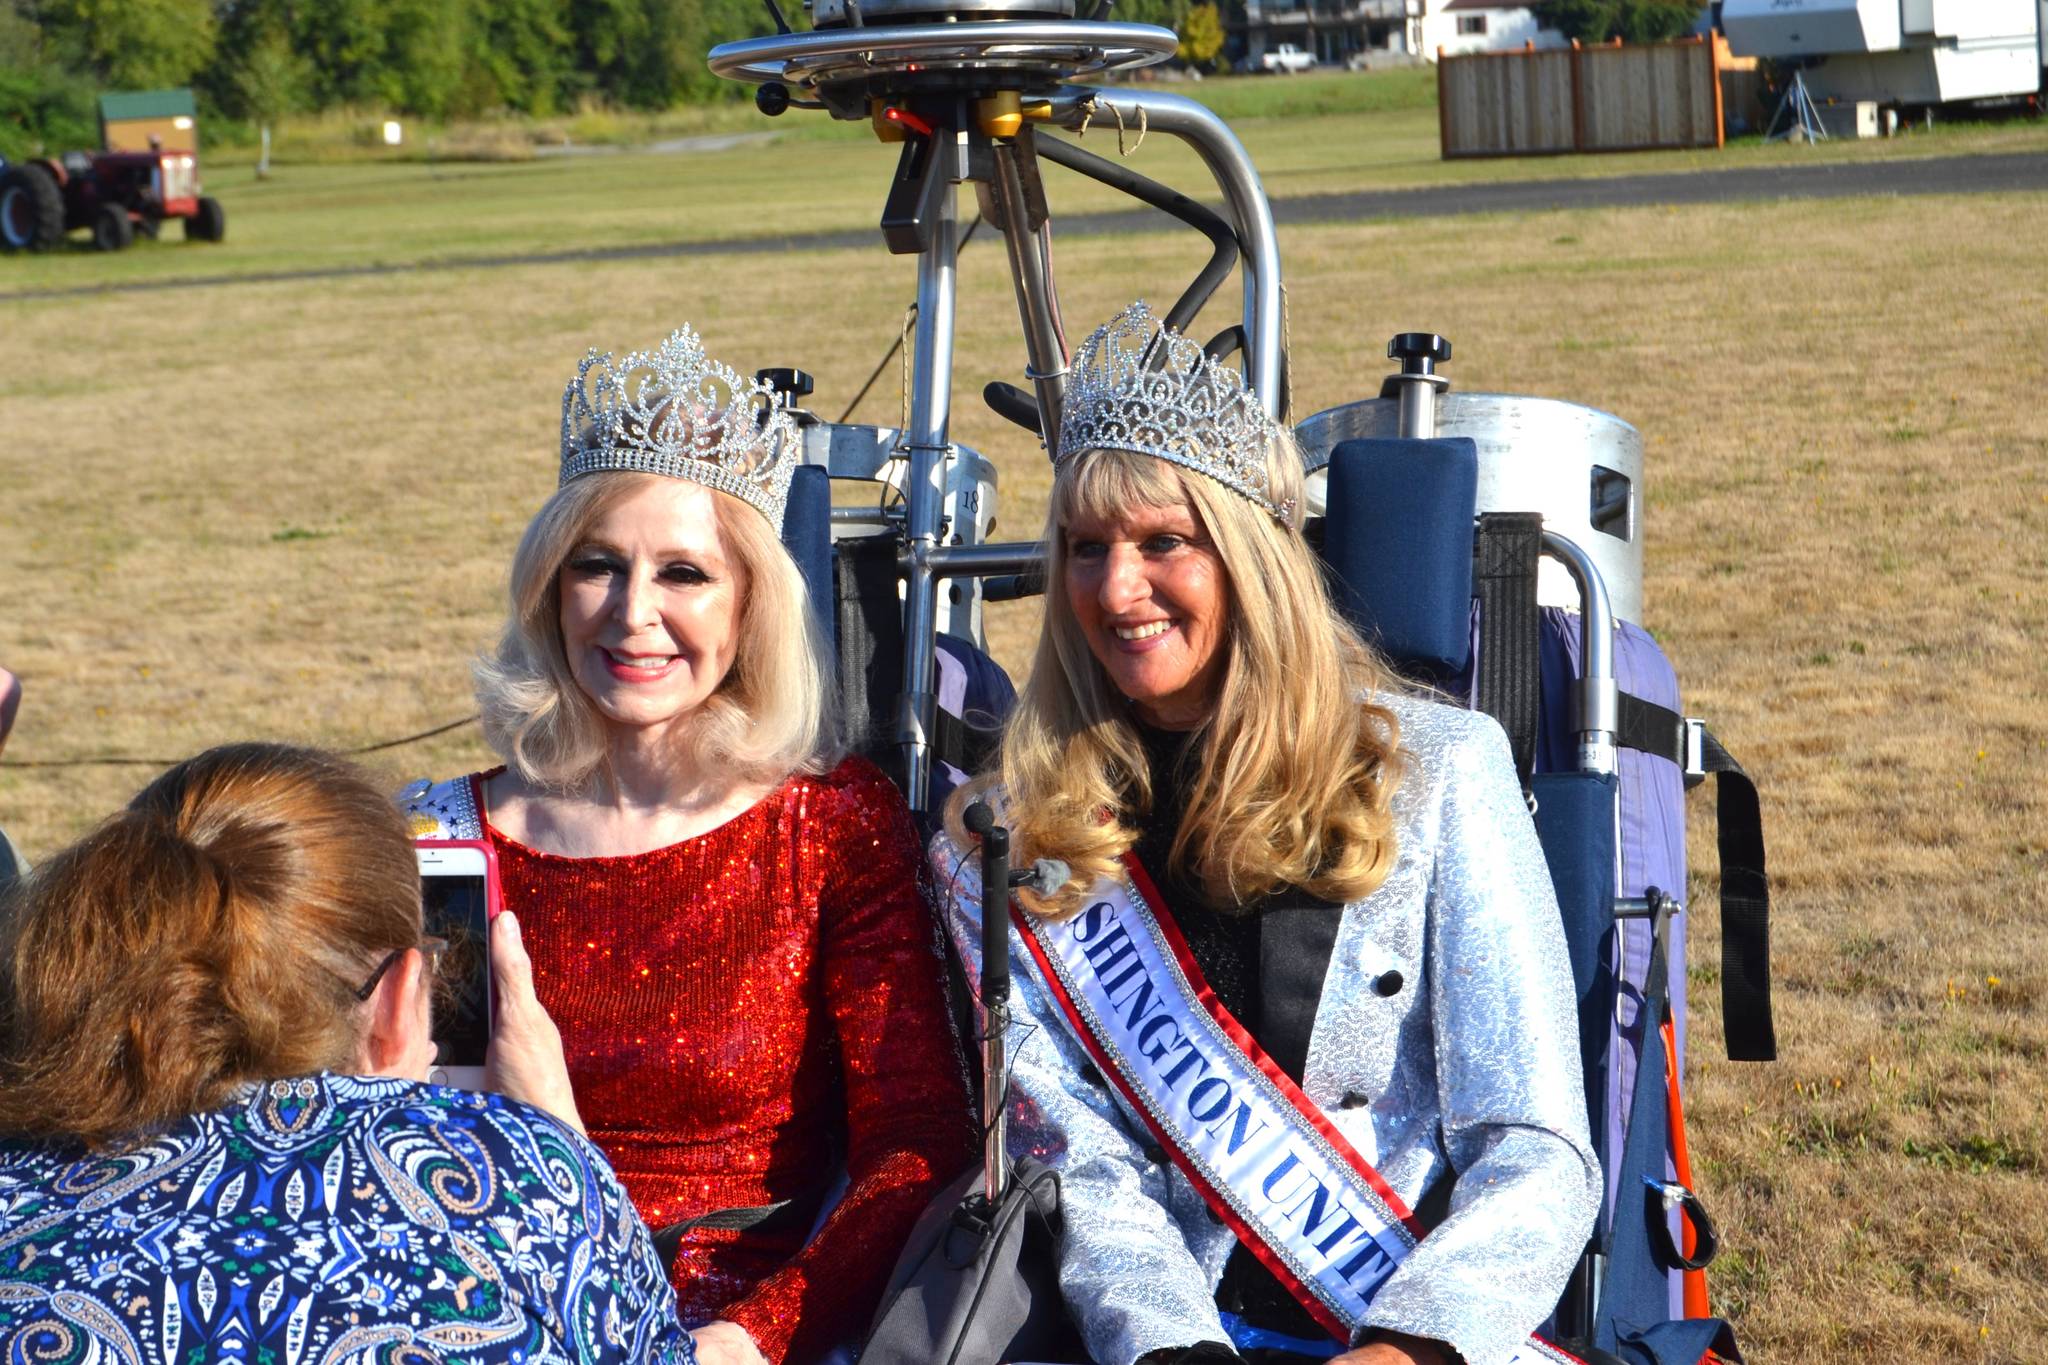 Cherie Kidd, Ms. Senior USA 2019-2020, left, and Captain-Crystal Stout, Ms. Senior Washington USA, pose for a photo before they go up to shoot a promotional video for the Ms. Senior USA pageant. (Matthew Nash/Olympic Peninsula News Group)